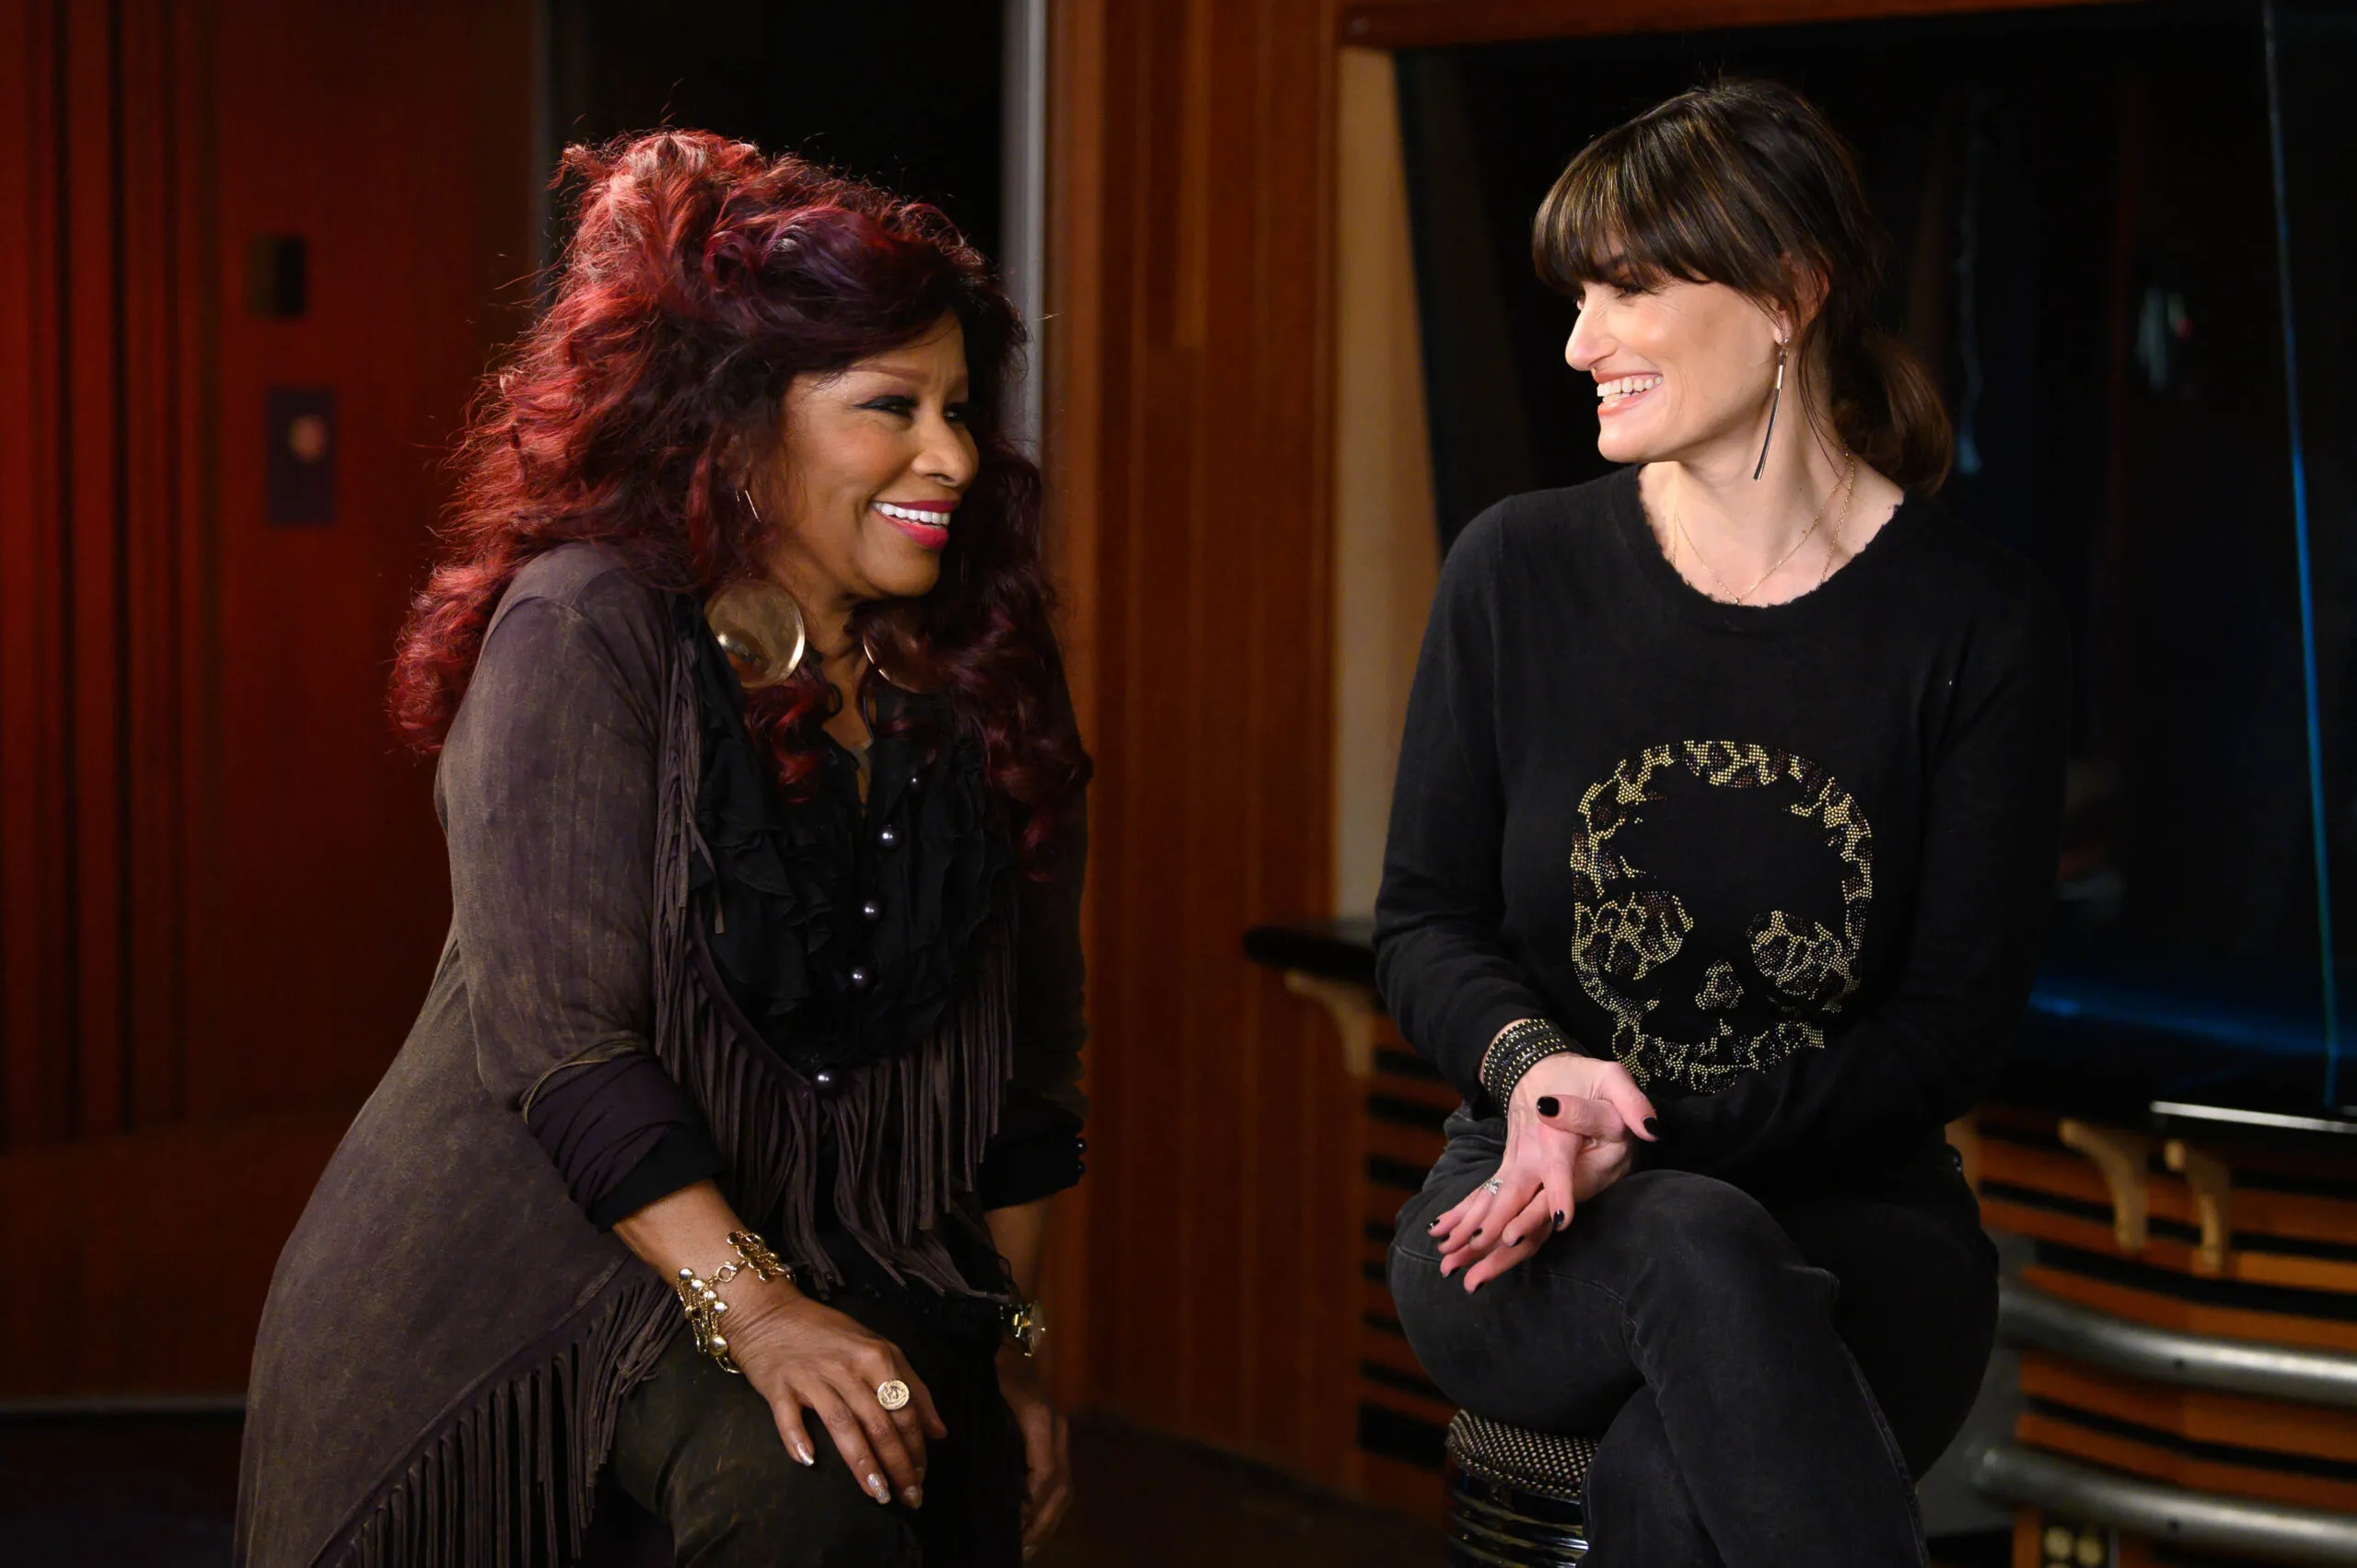 Chaka Khan and Idina Menzel smile widely as they sit next to each other on stools in a recording booth.